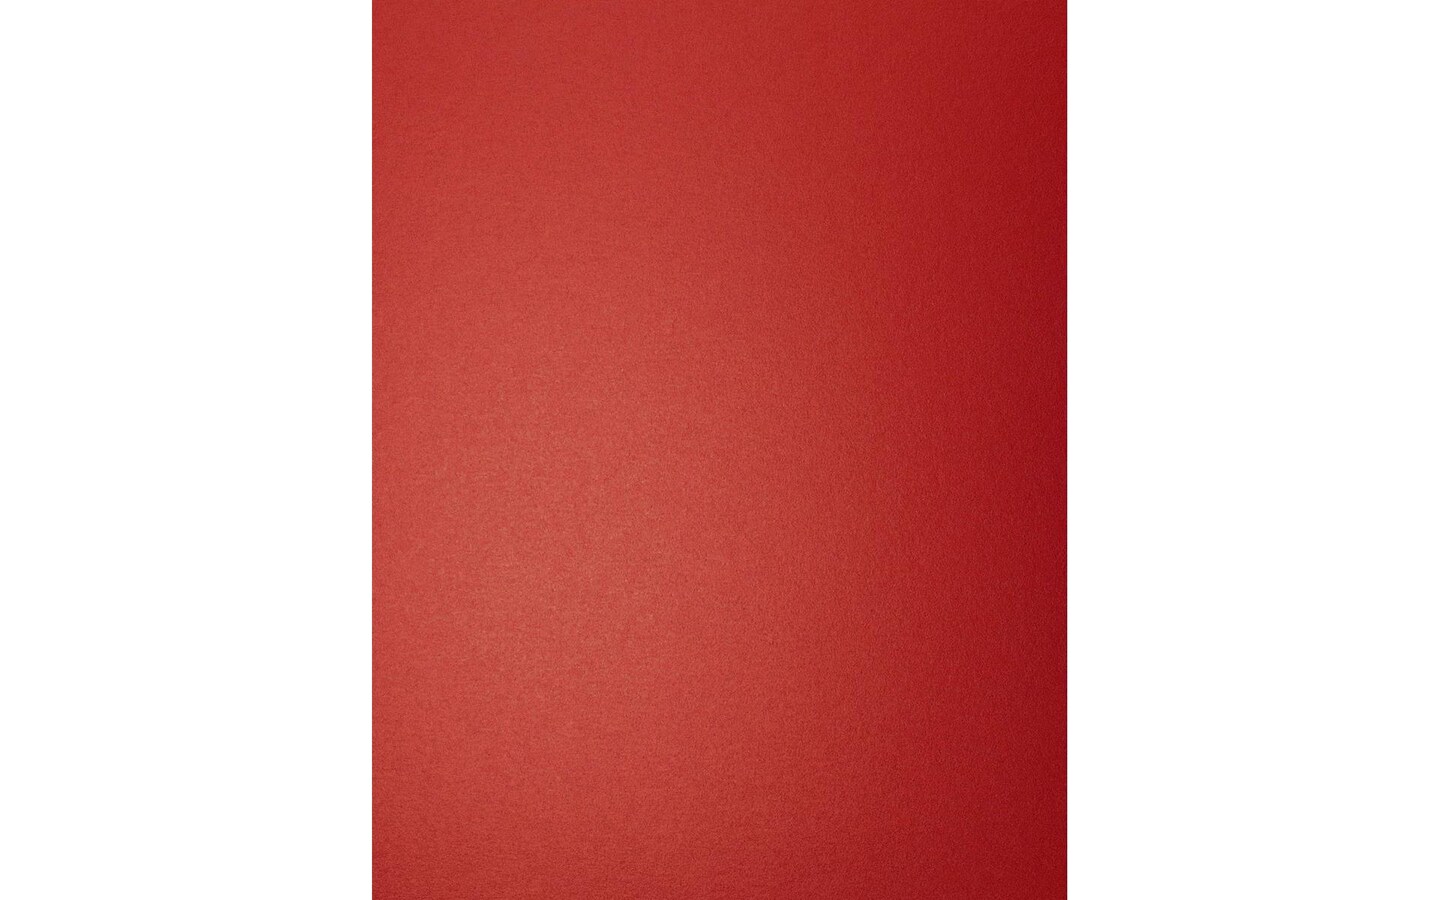 PA Paper™ Accents Dark Red 8.5 x 11 65lb. Pearlized Cardstock, 25 Sheets